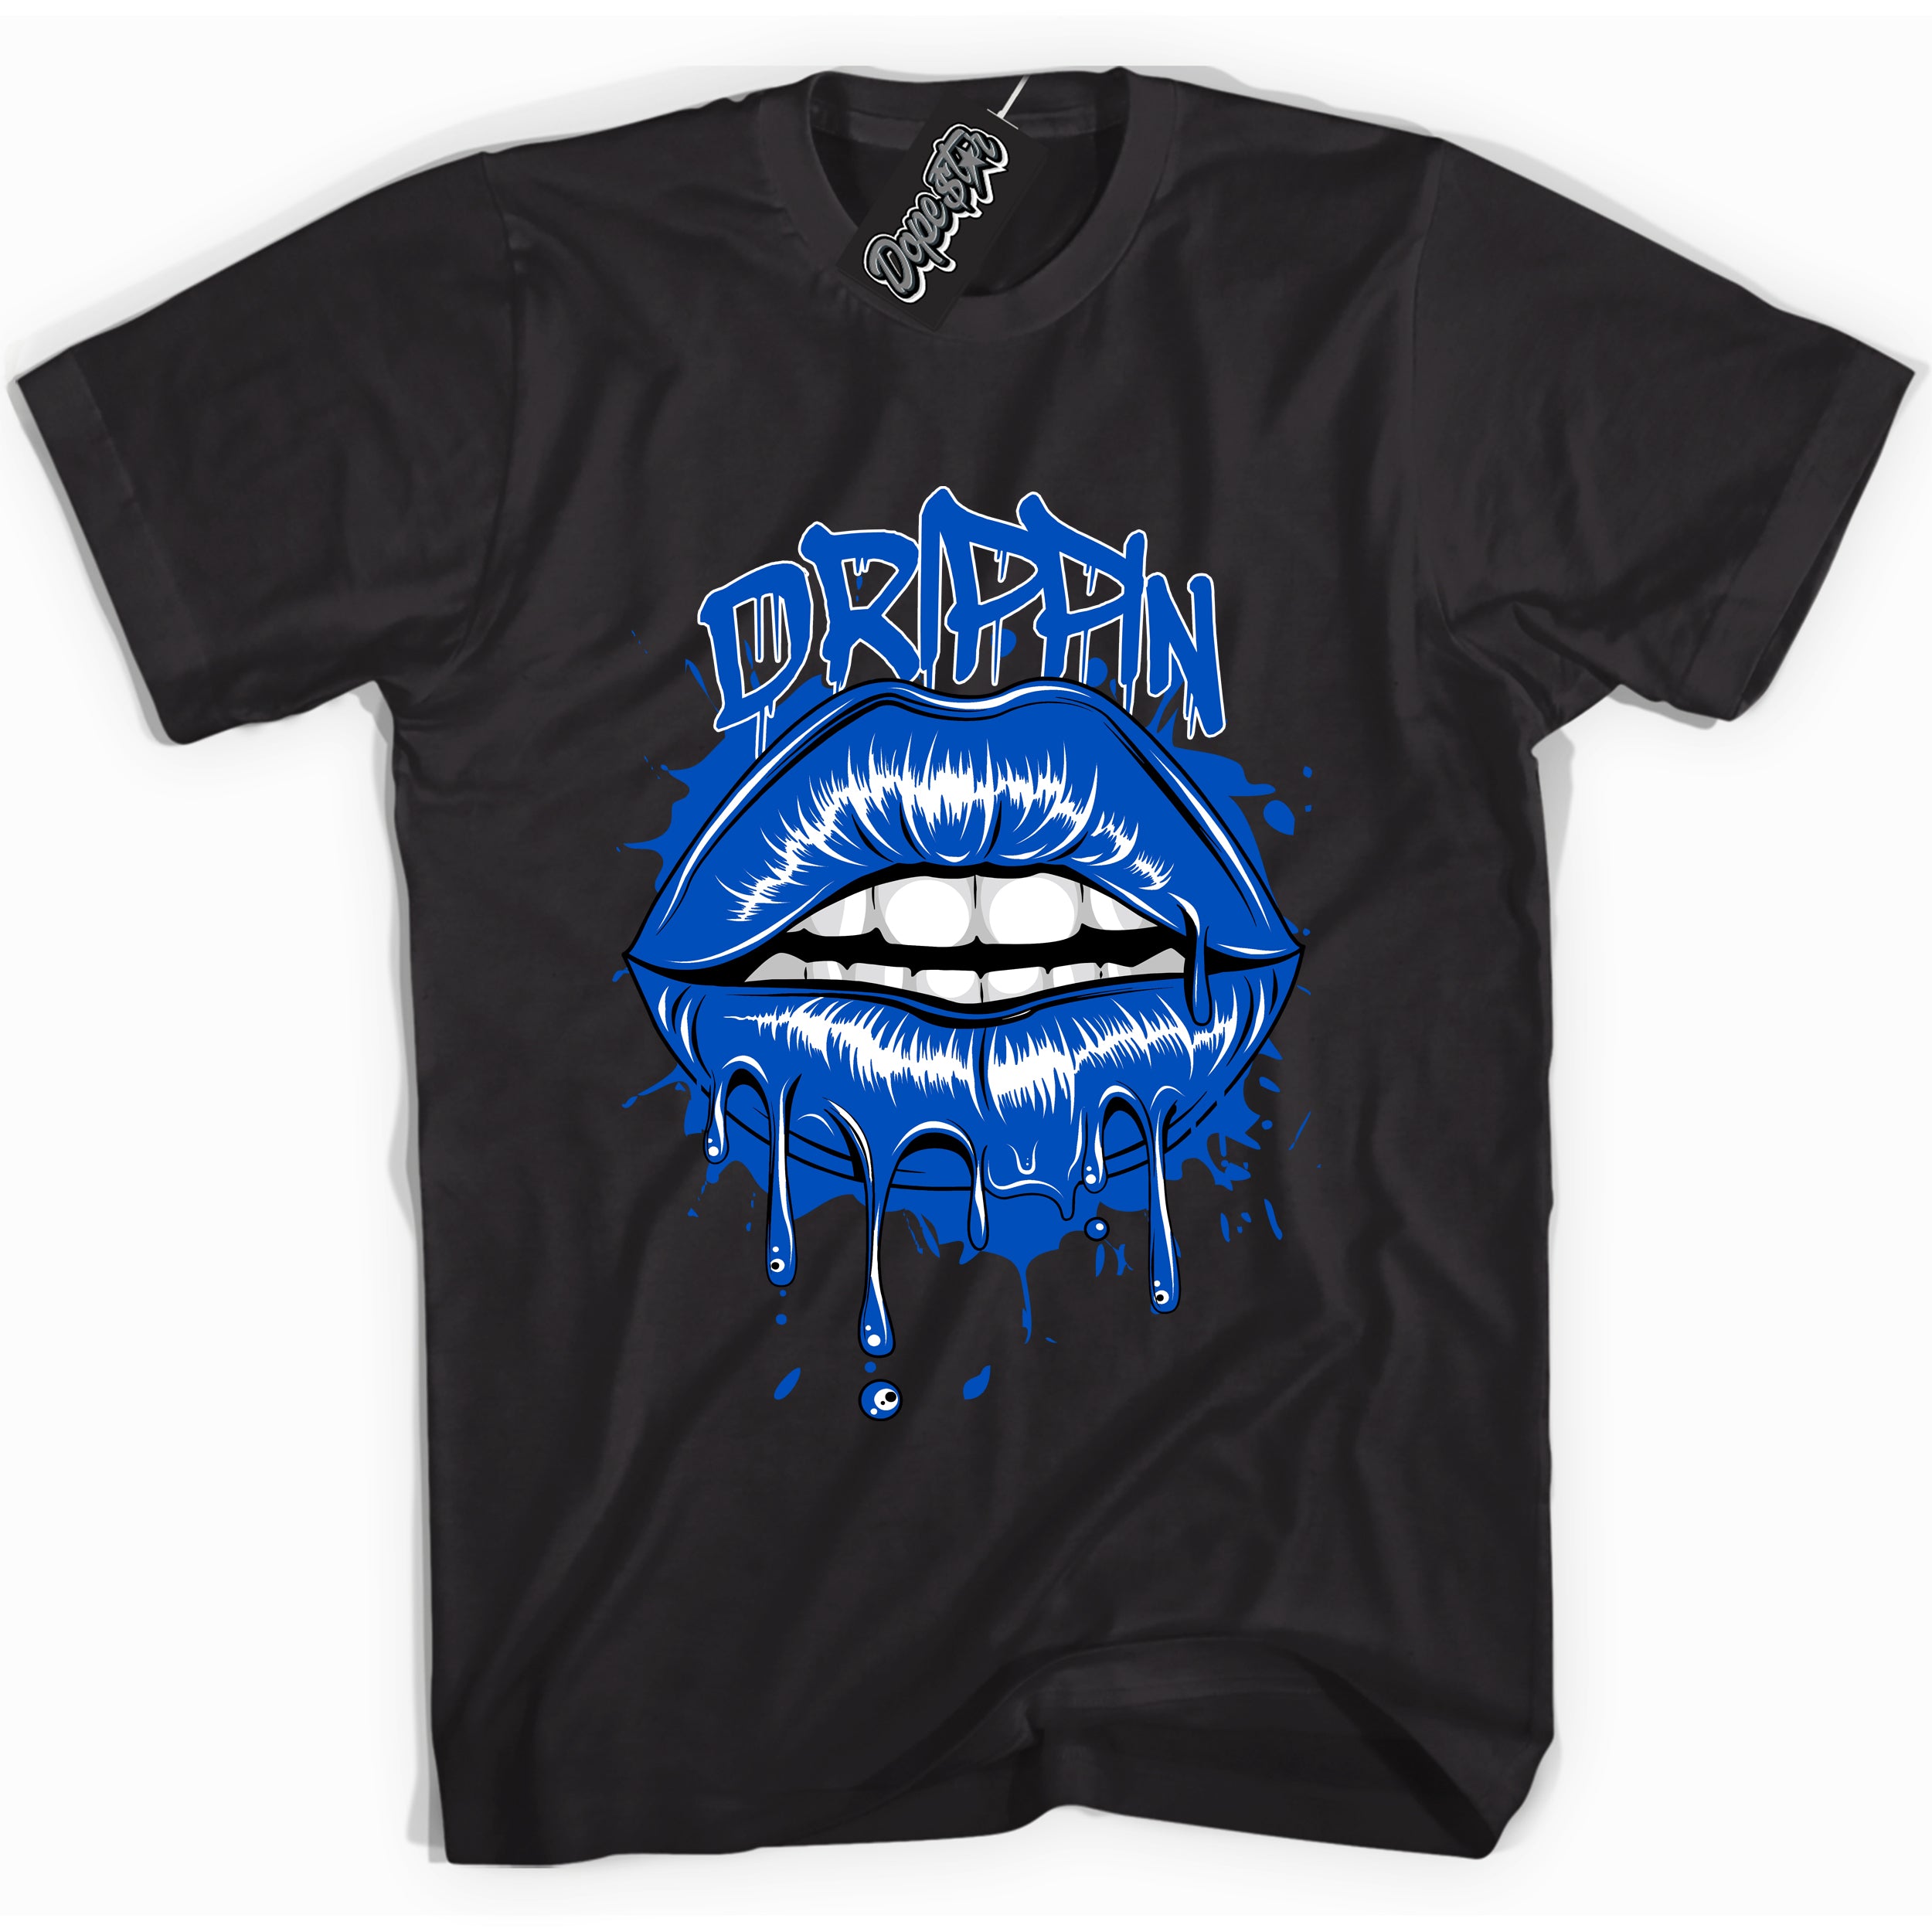 Cool Black graphic tee with "Drippin" design, that perfectly matches Royal Reimagined 1s sneakers 